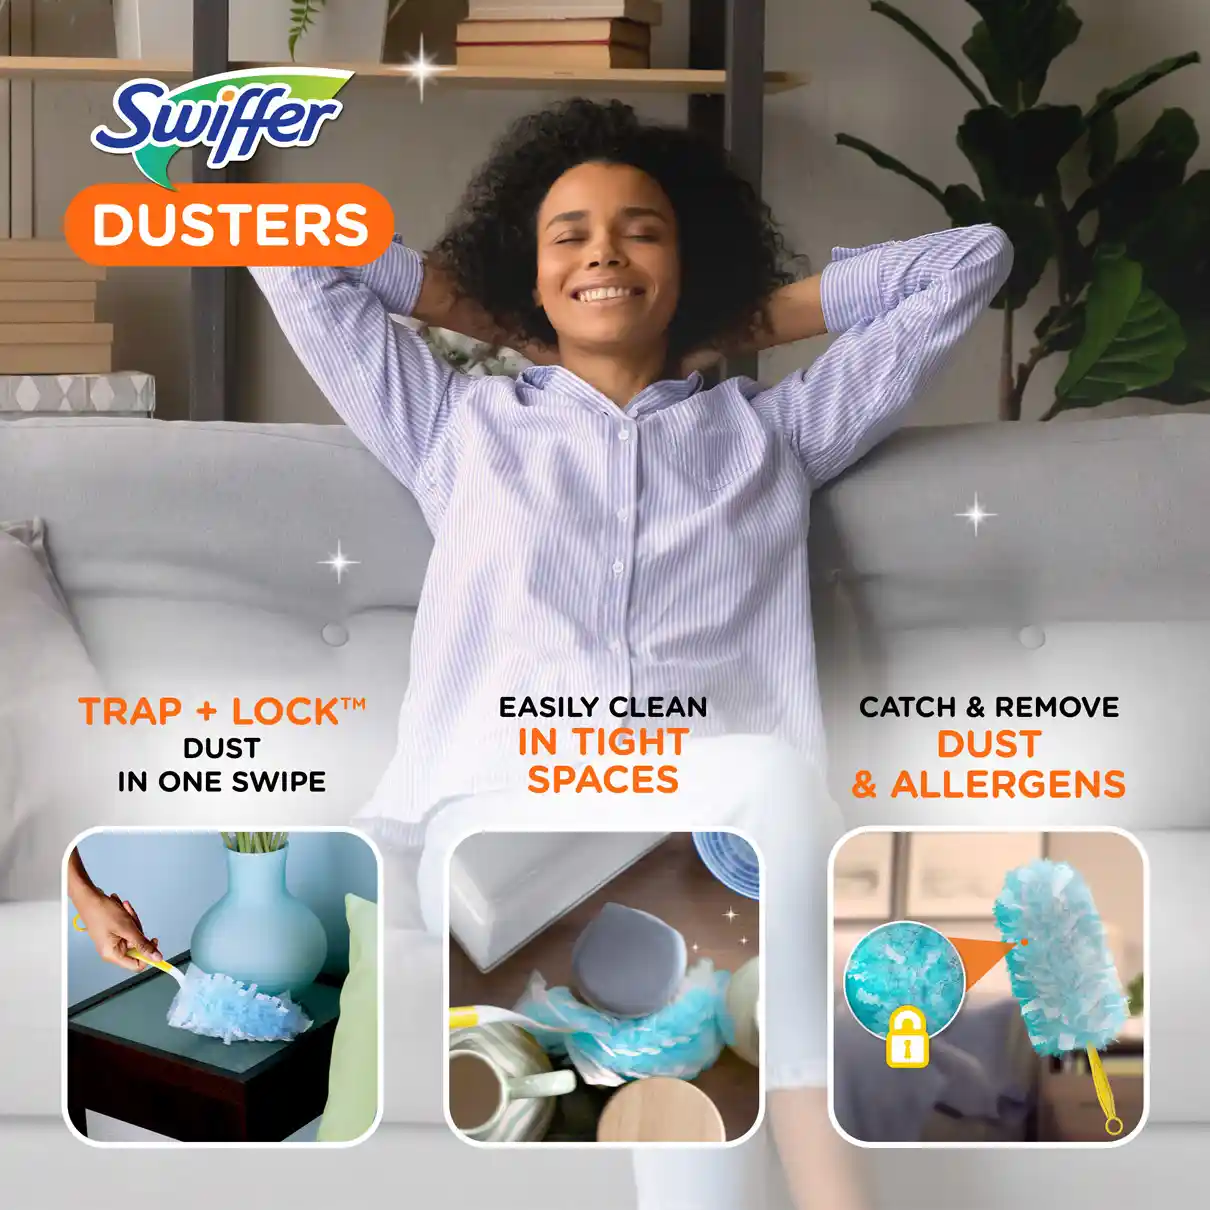 Dusters Refills - Unscented